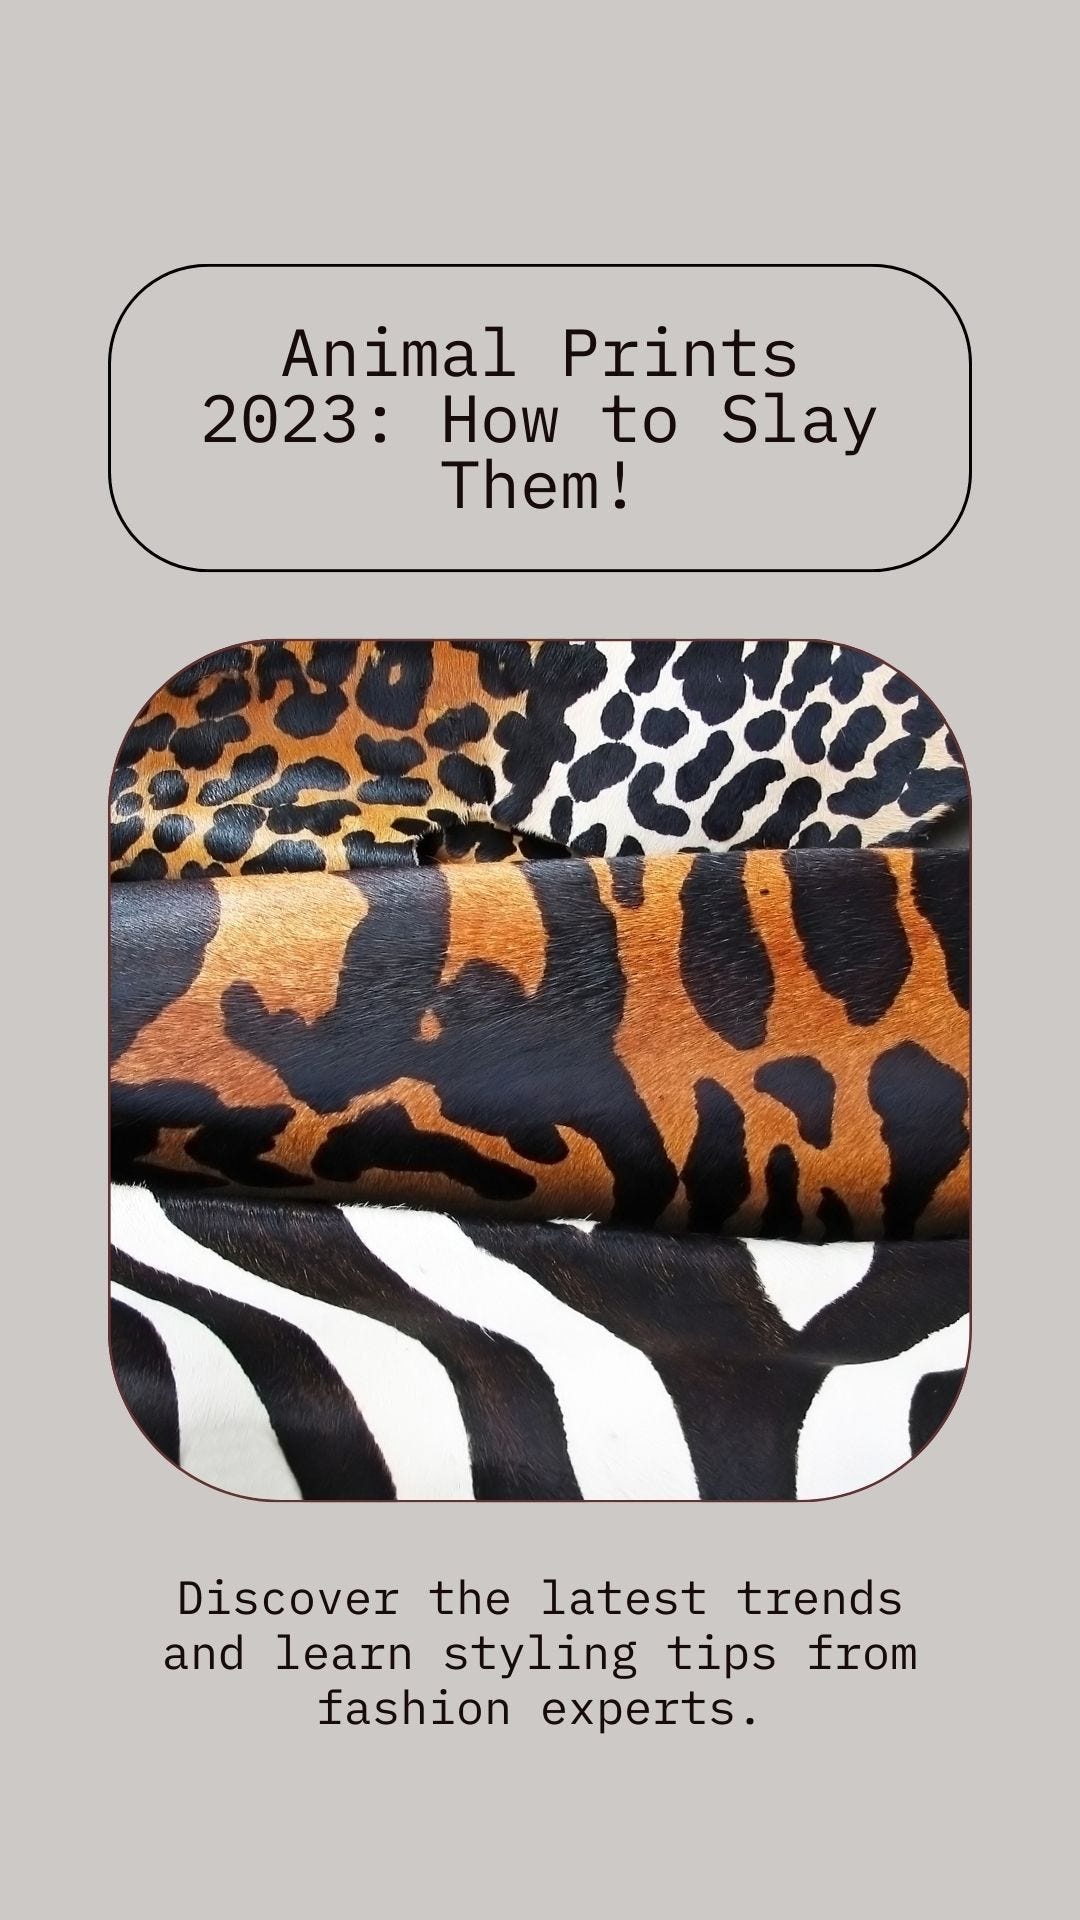 Animal Prints Are Back in 2023: How to Slay Them Like a Pro